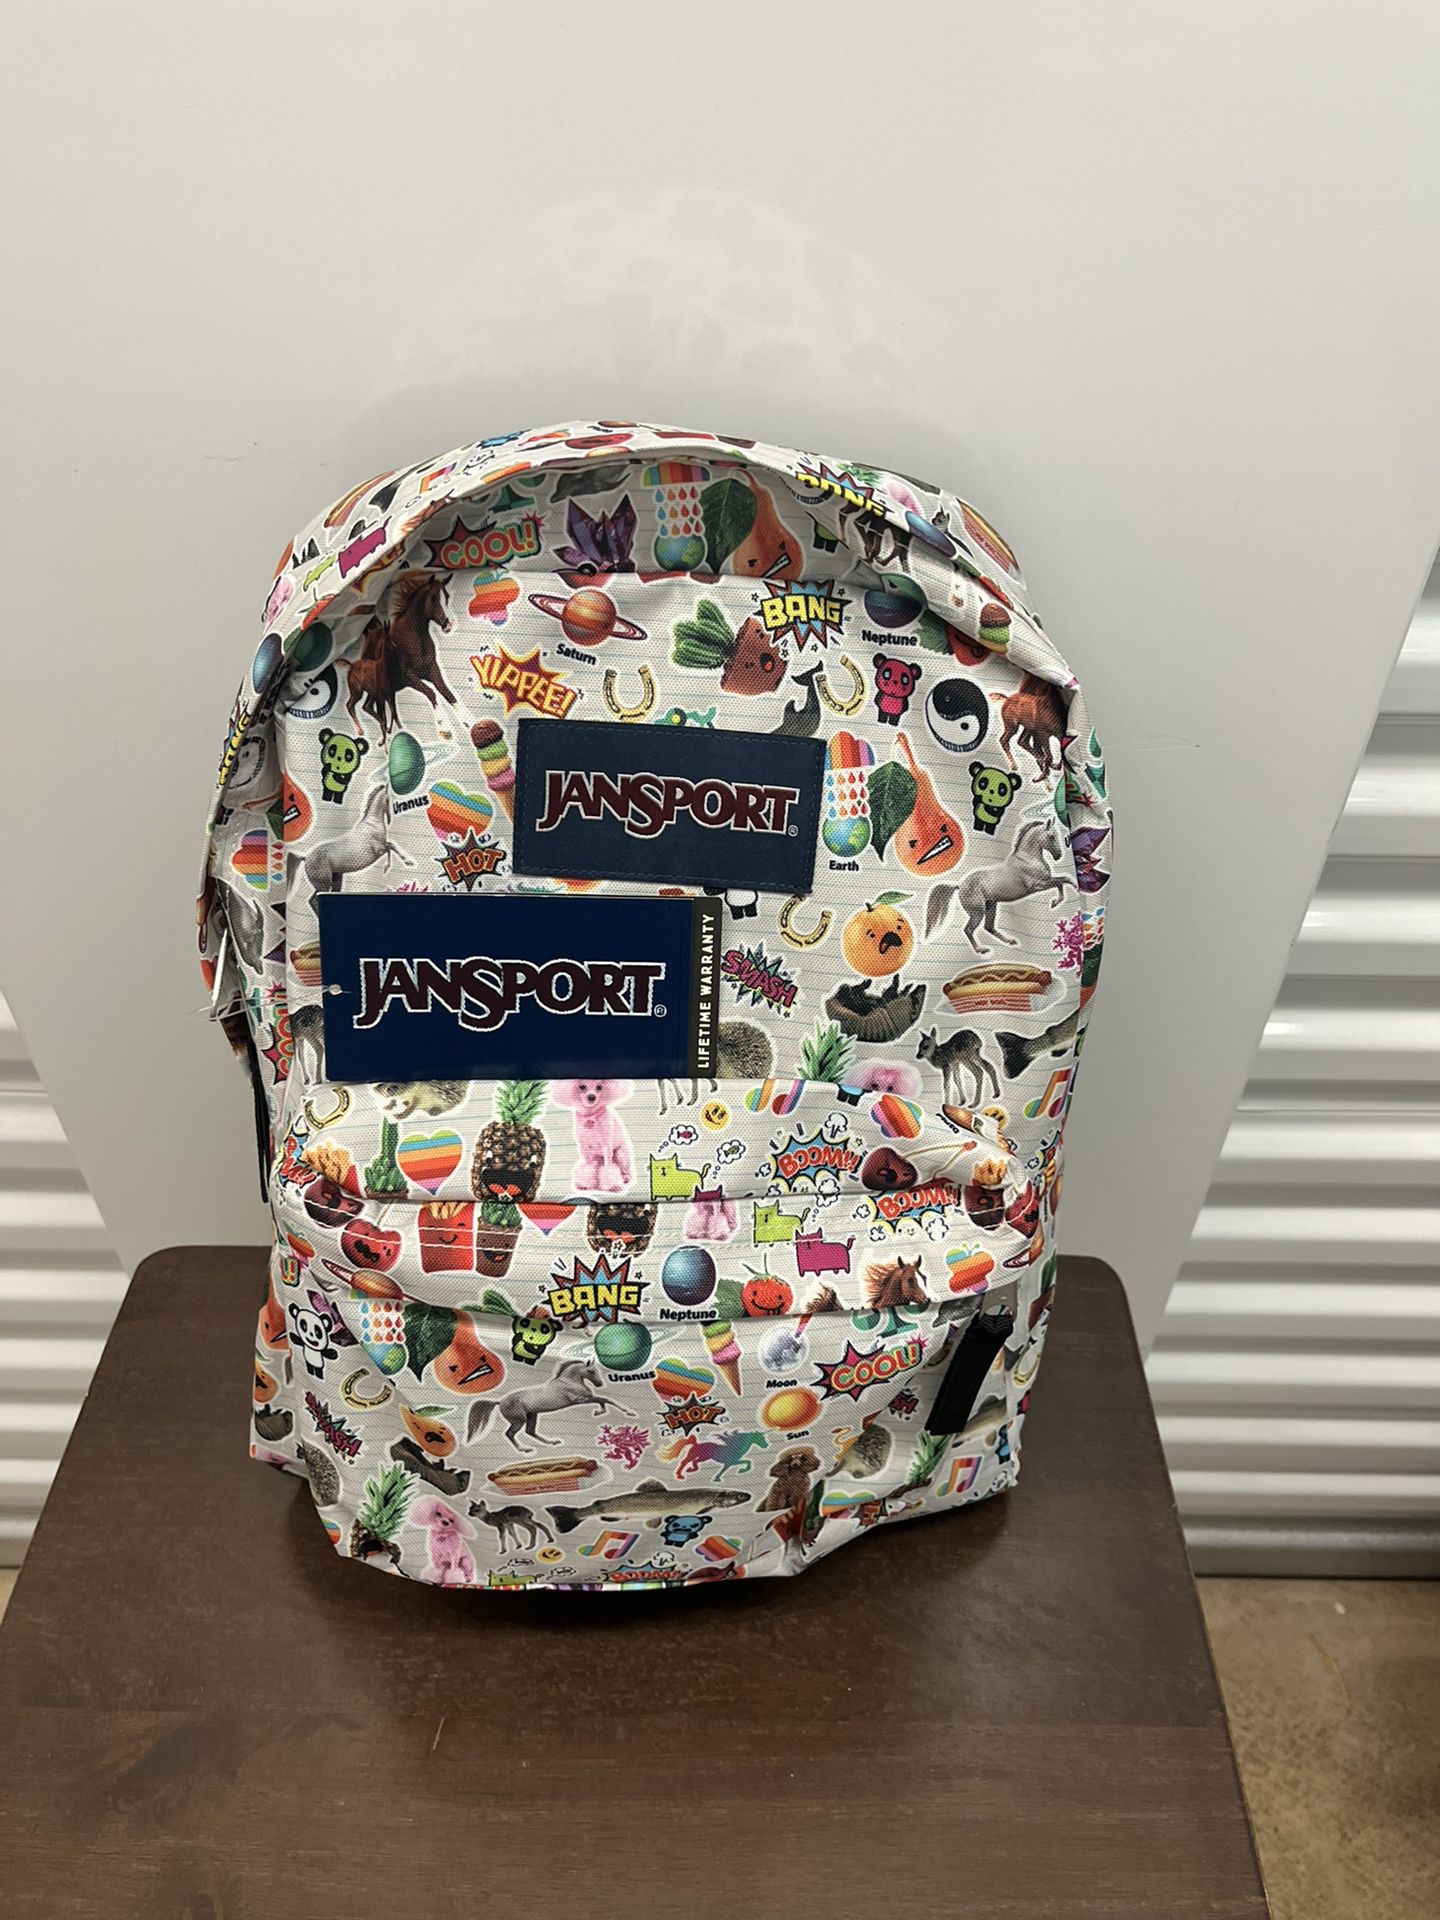 JanSport Backpack New The JanSport SuperBreak backpack has been the 1 selling school pack for students around the world for nearly 35 years. The Super